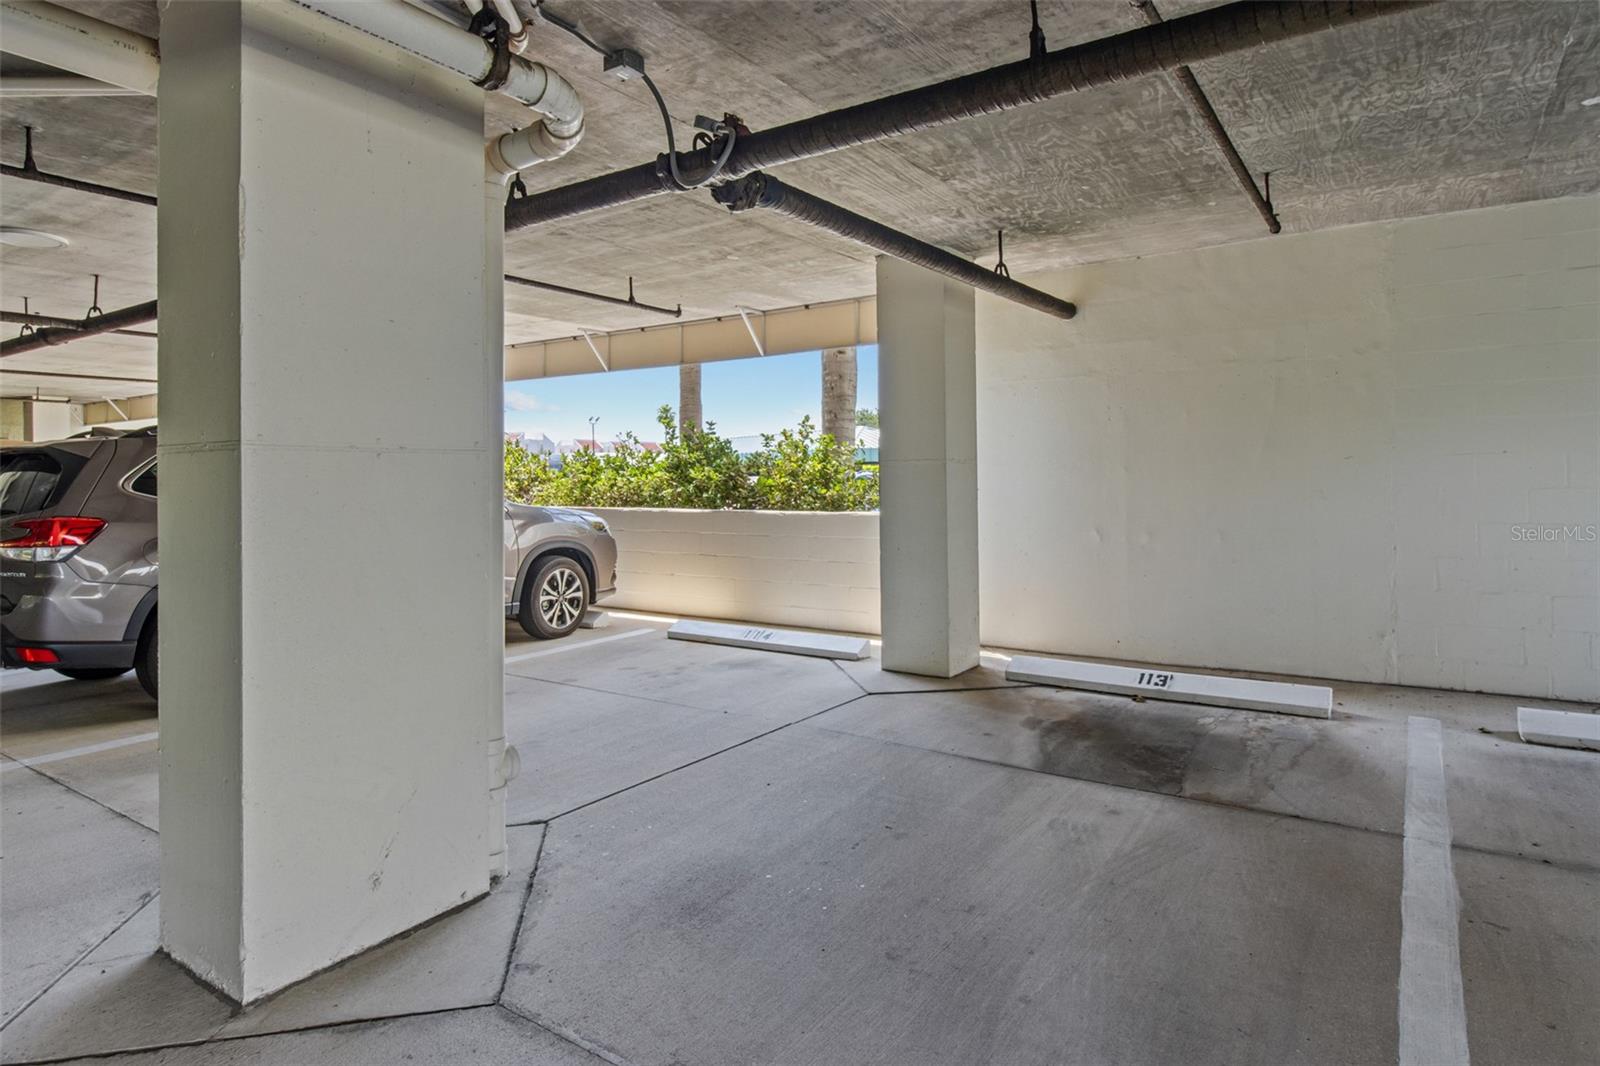 Your vehicle will be protected from the elements.  Under cover parking space #113 is assigned to the condominium.  There is also plenty of guest parking around the community.